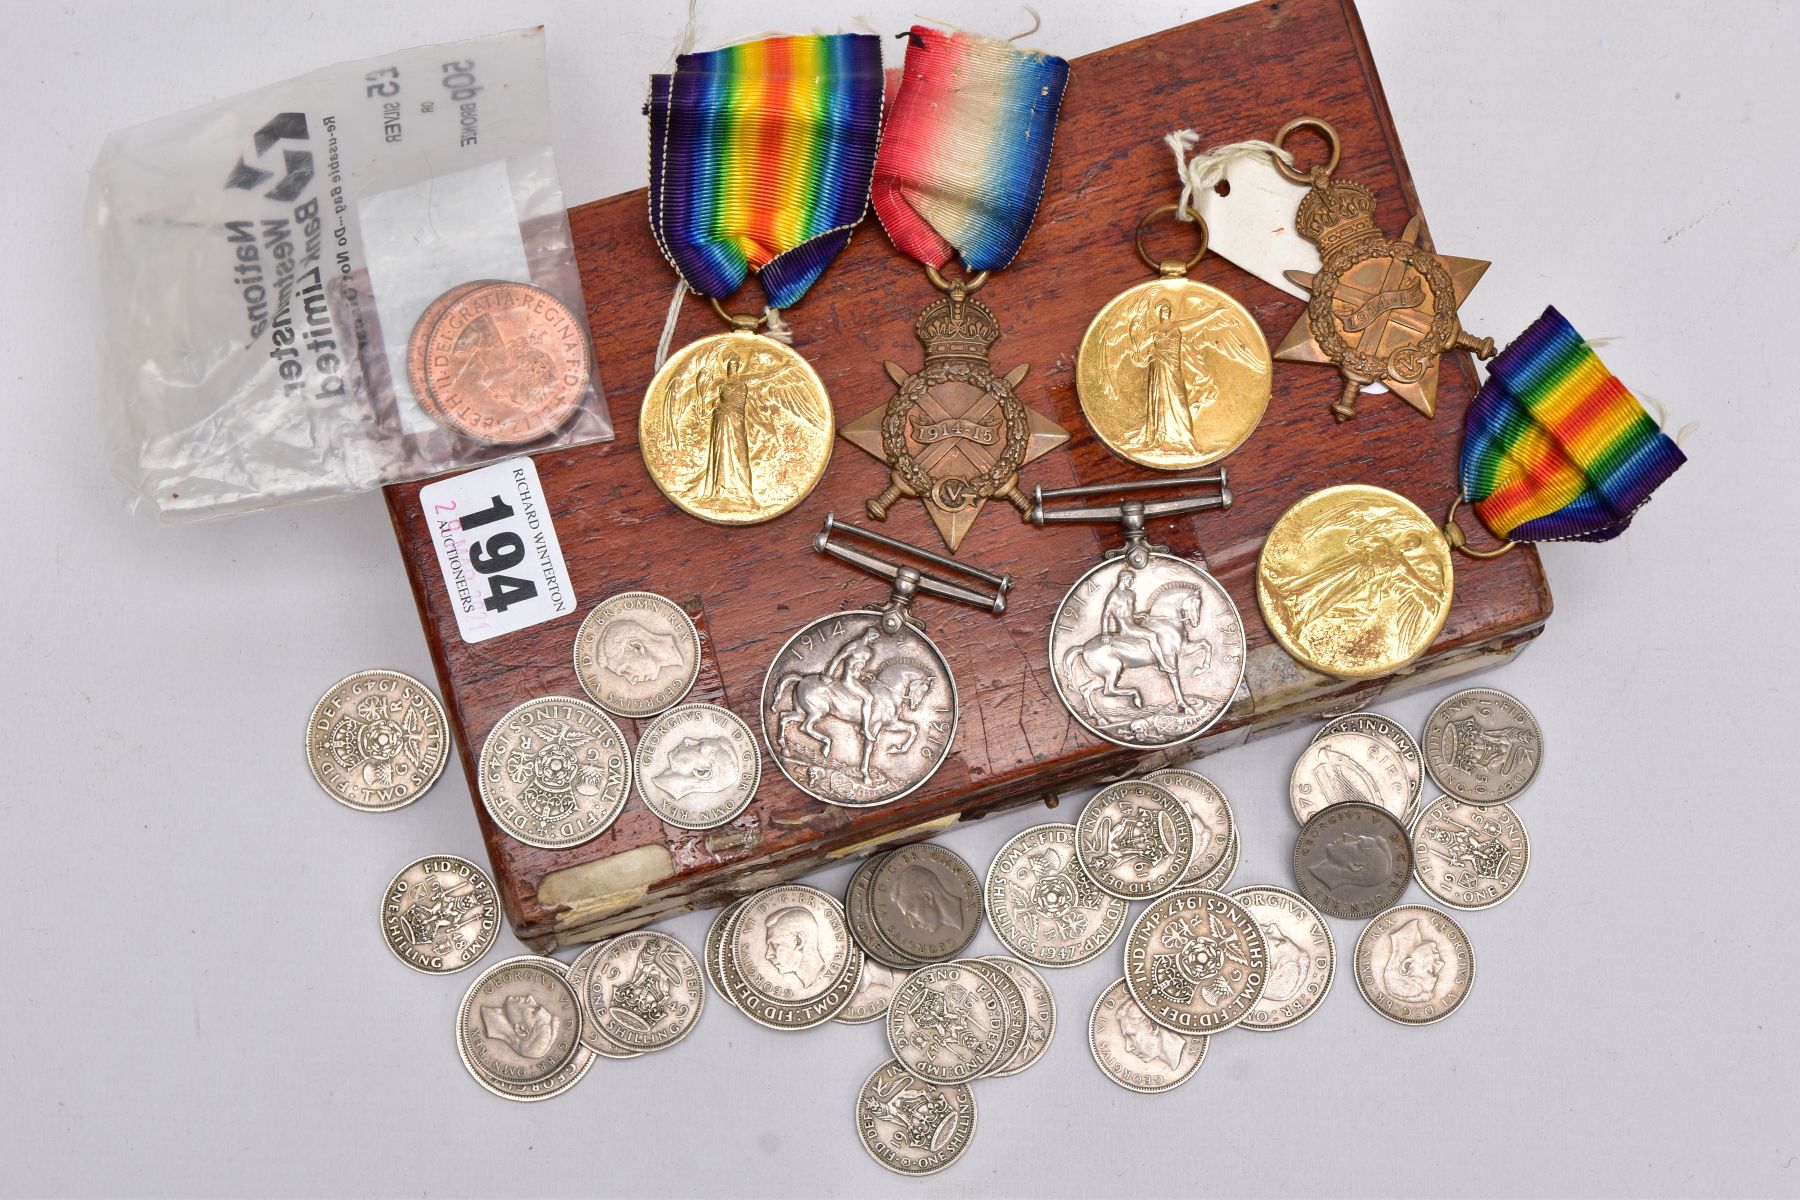 A BOX CONTAINING SOME BRITISH COINAGE AND MEDALS GROUPS comprising British War & Victory medal, pair